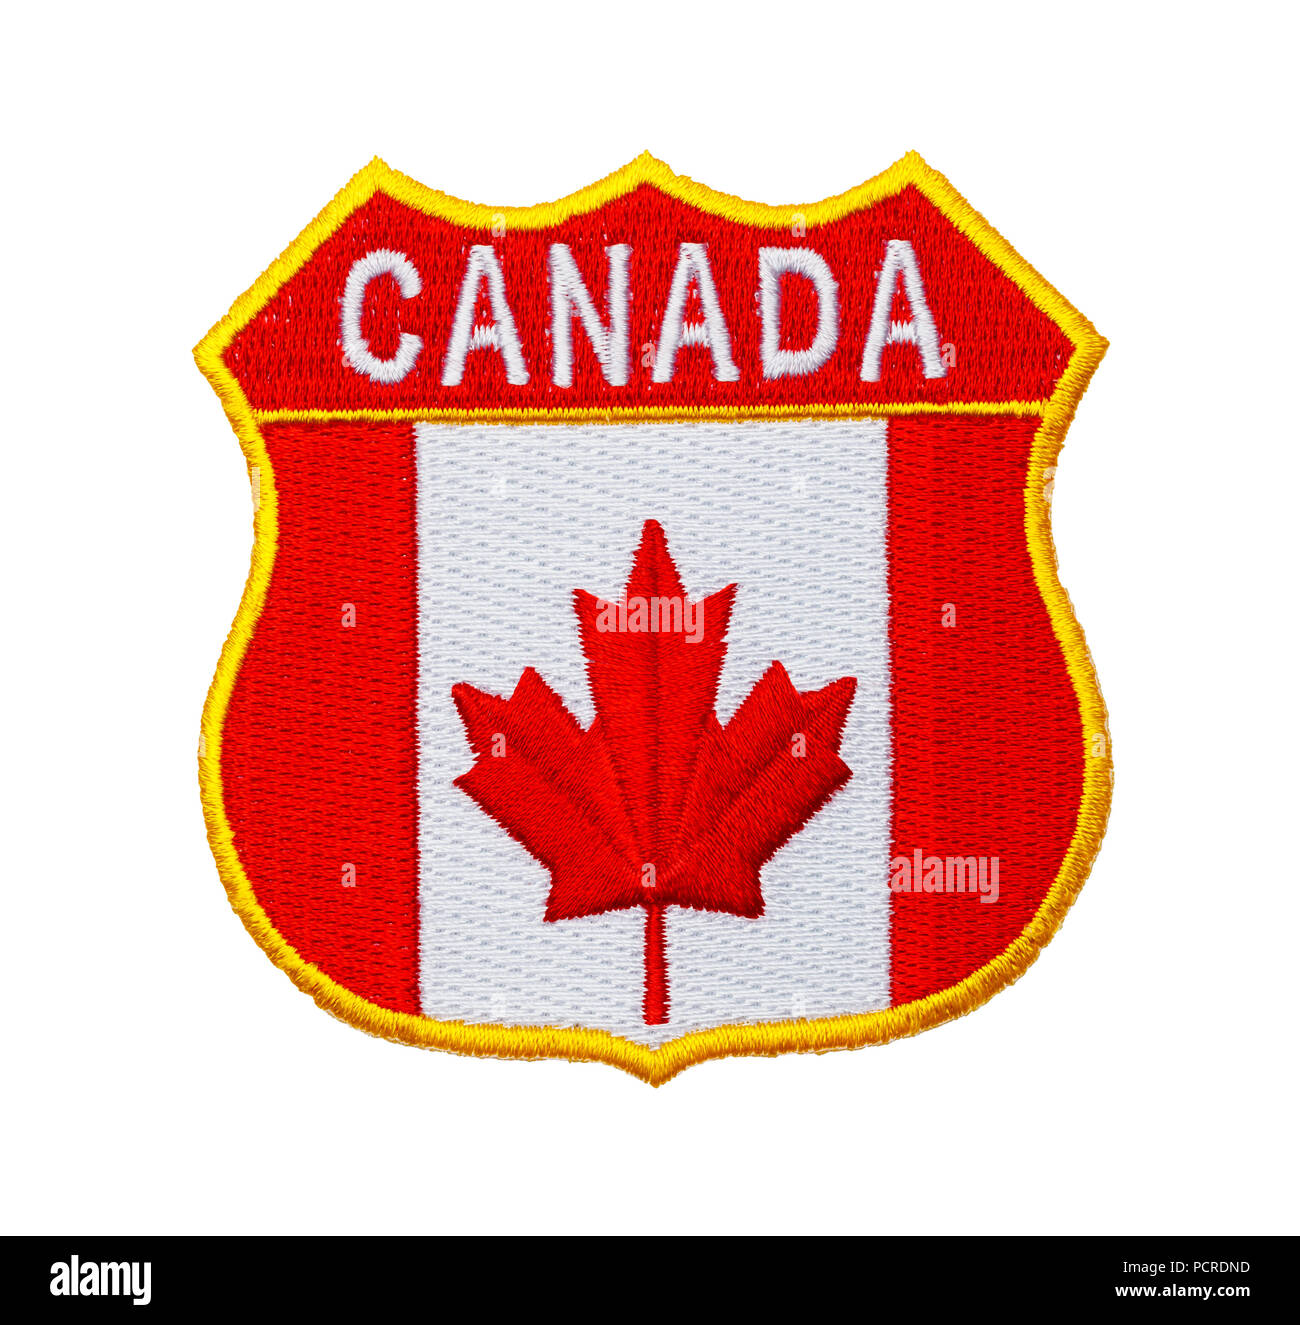 Canadian Flag Patch Isolated on a White Background. Stock Photo